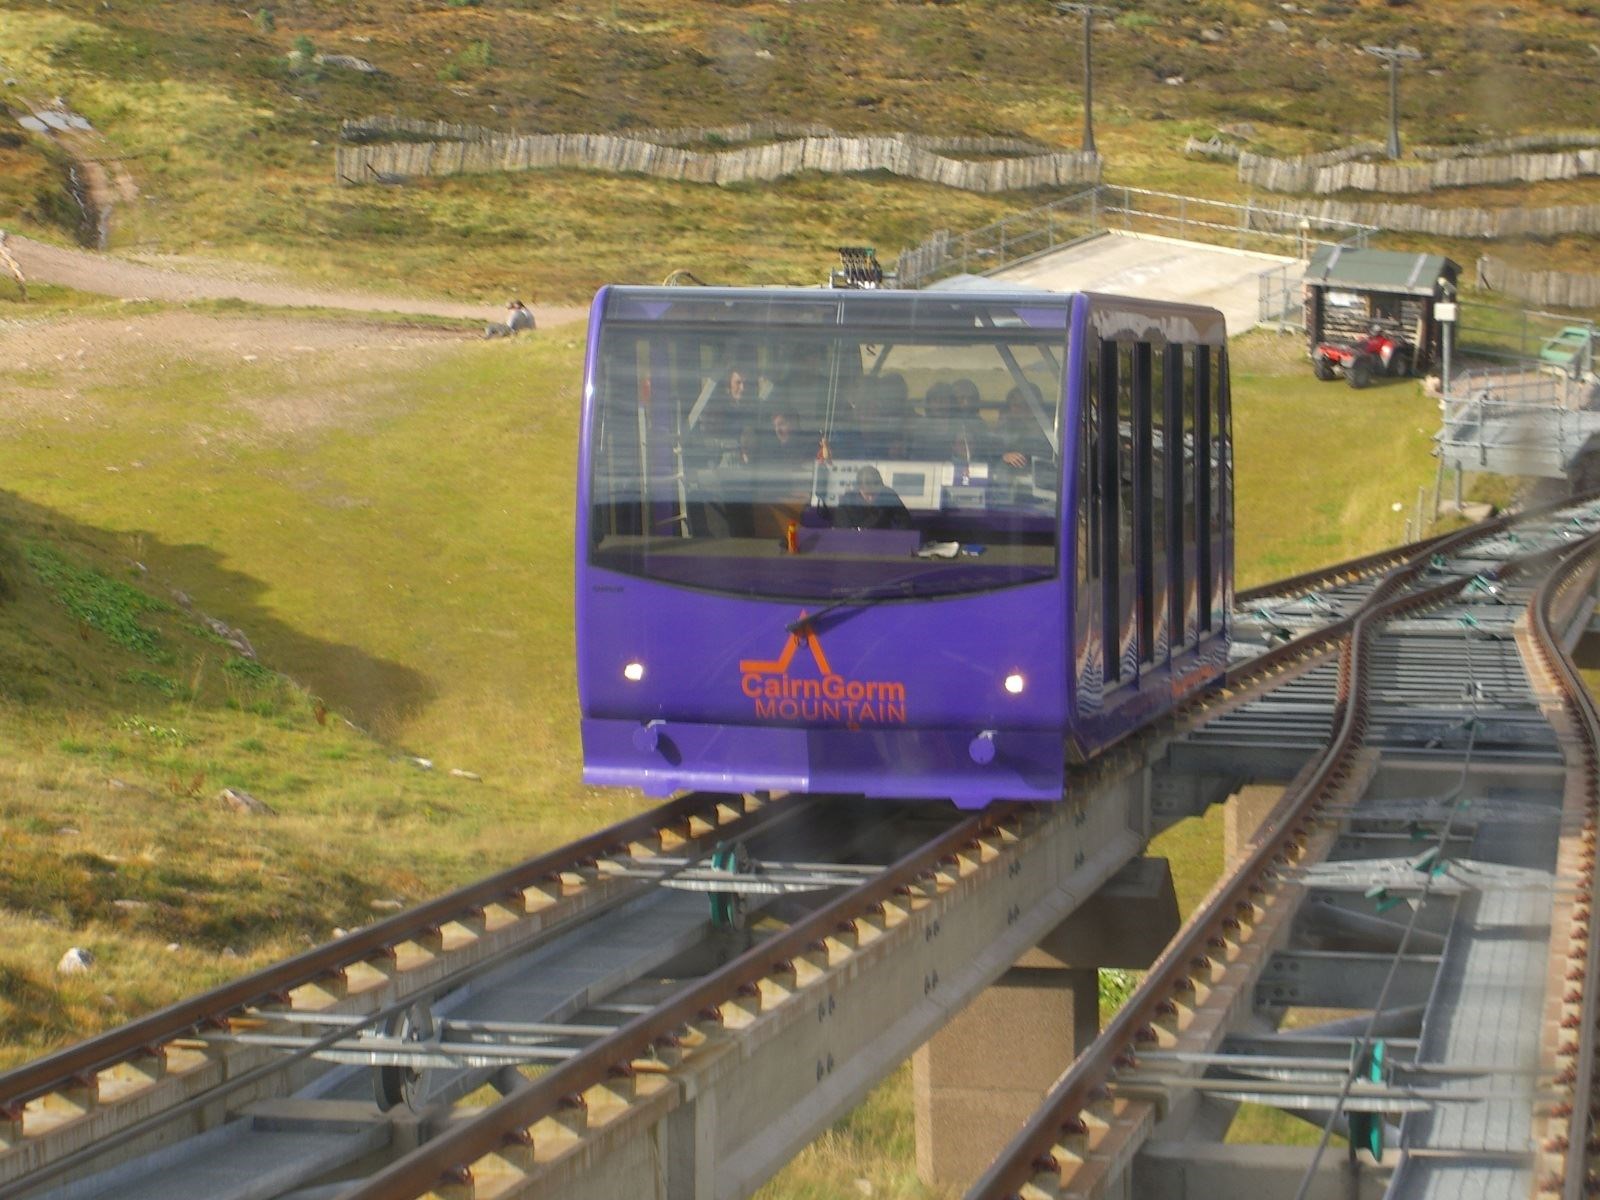 The funicular is currently out of service at Cairngorm Mountain.